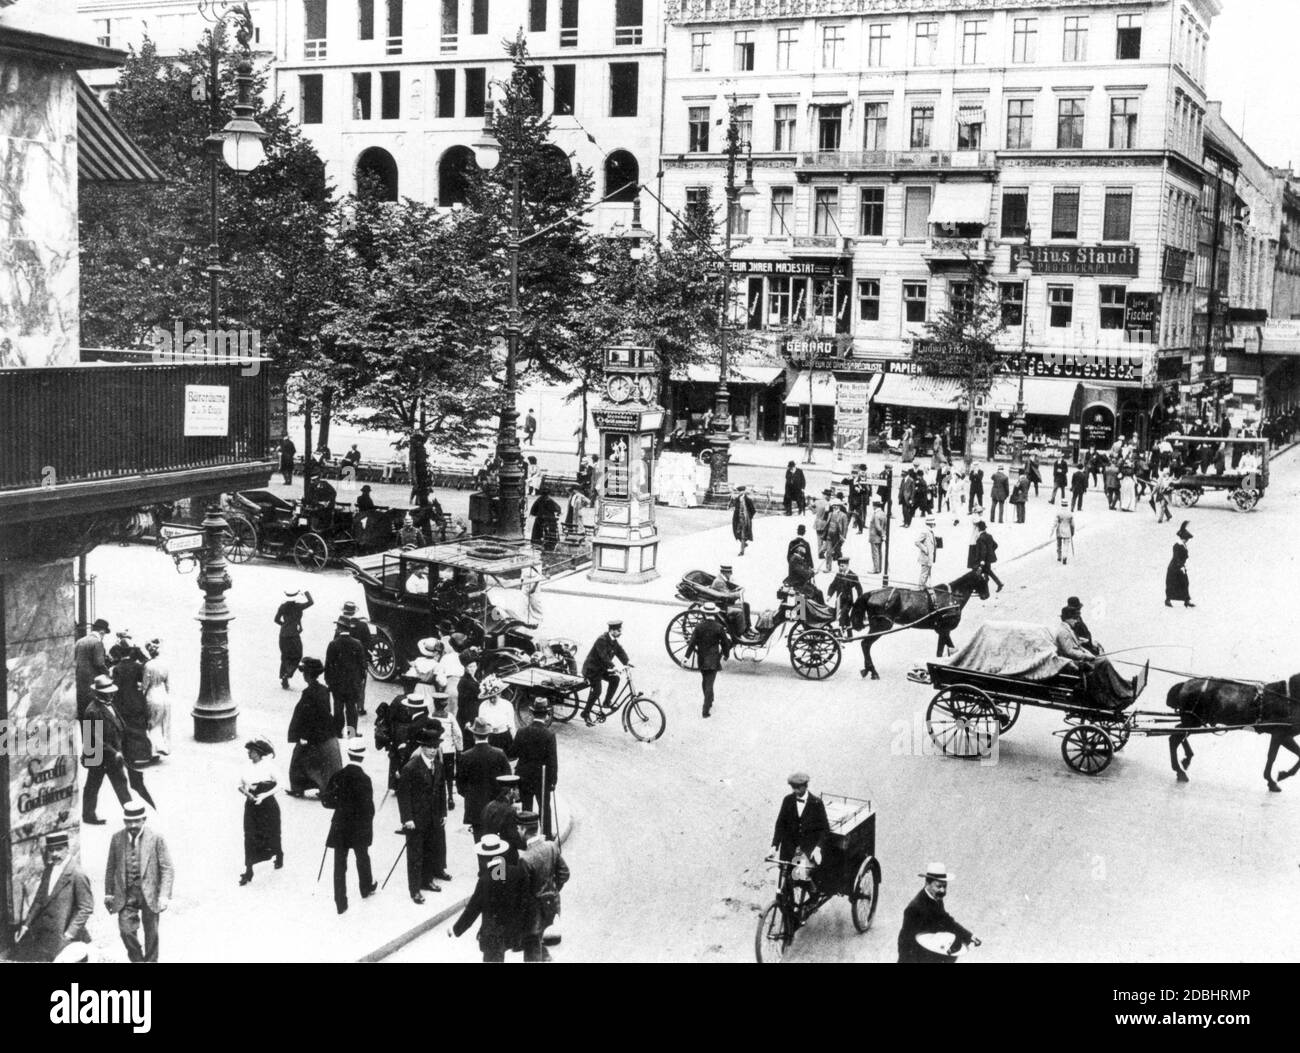 'The photograph shows the intersection of Friedrichstrasse and Unter den Linden in Berlin in 1913, filled with carts and passers-by, with numerous billboards hanging from the houses, including one that is in the middle of the street: ''Julius Staudt. Photograph'', ''Ludwig Fischer'' and ''Krueger & Oberbeck'' (tobacco shop).' Stock Photo